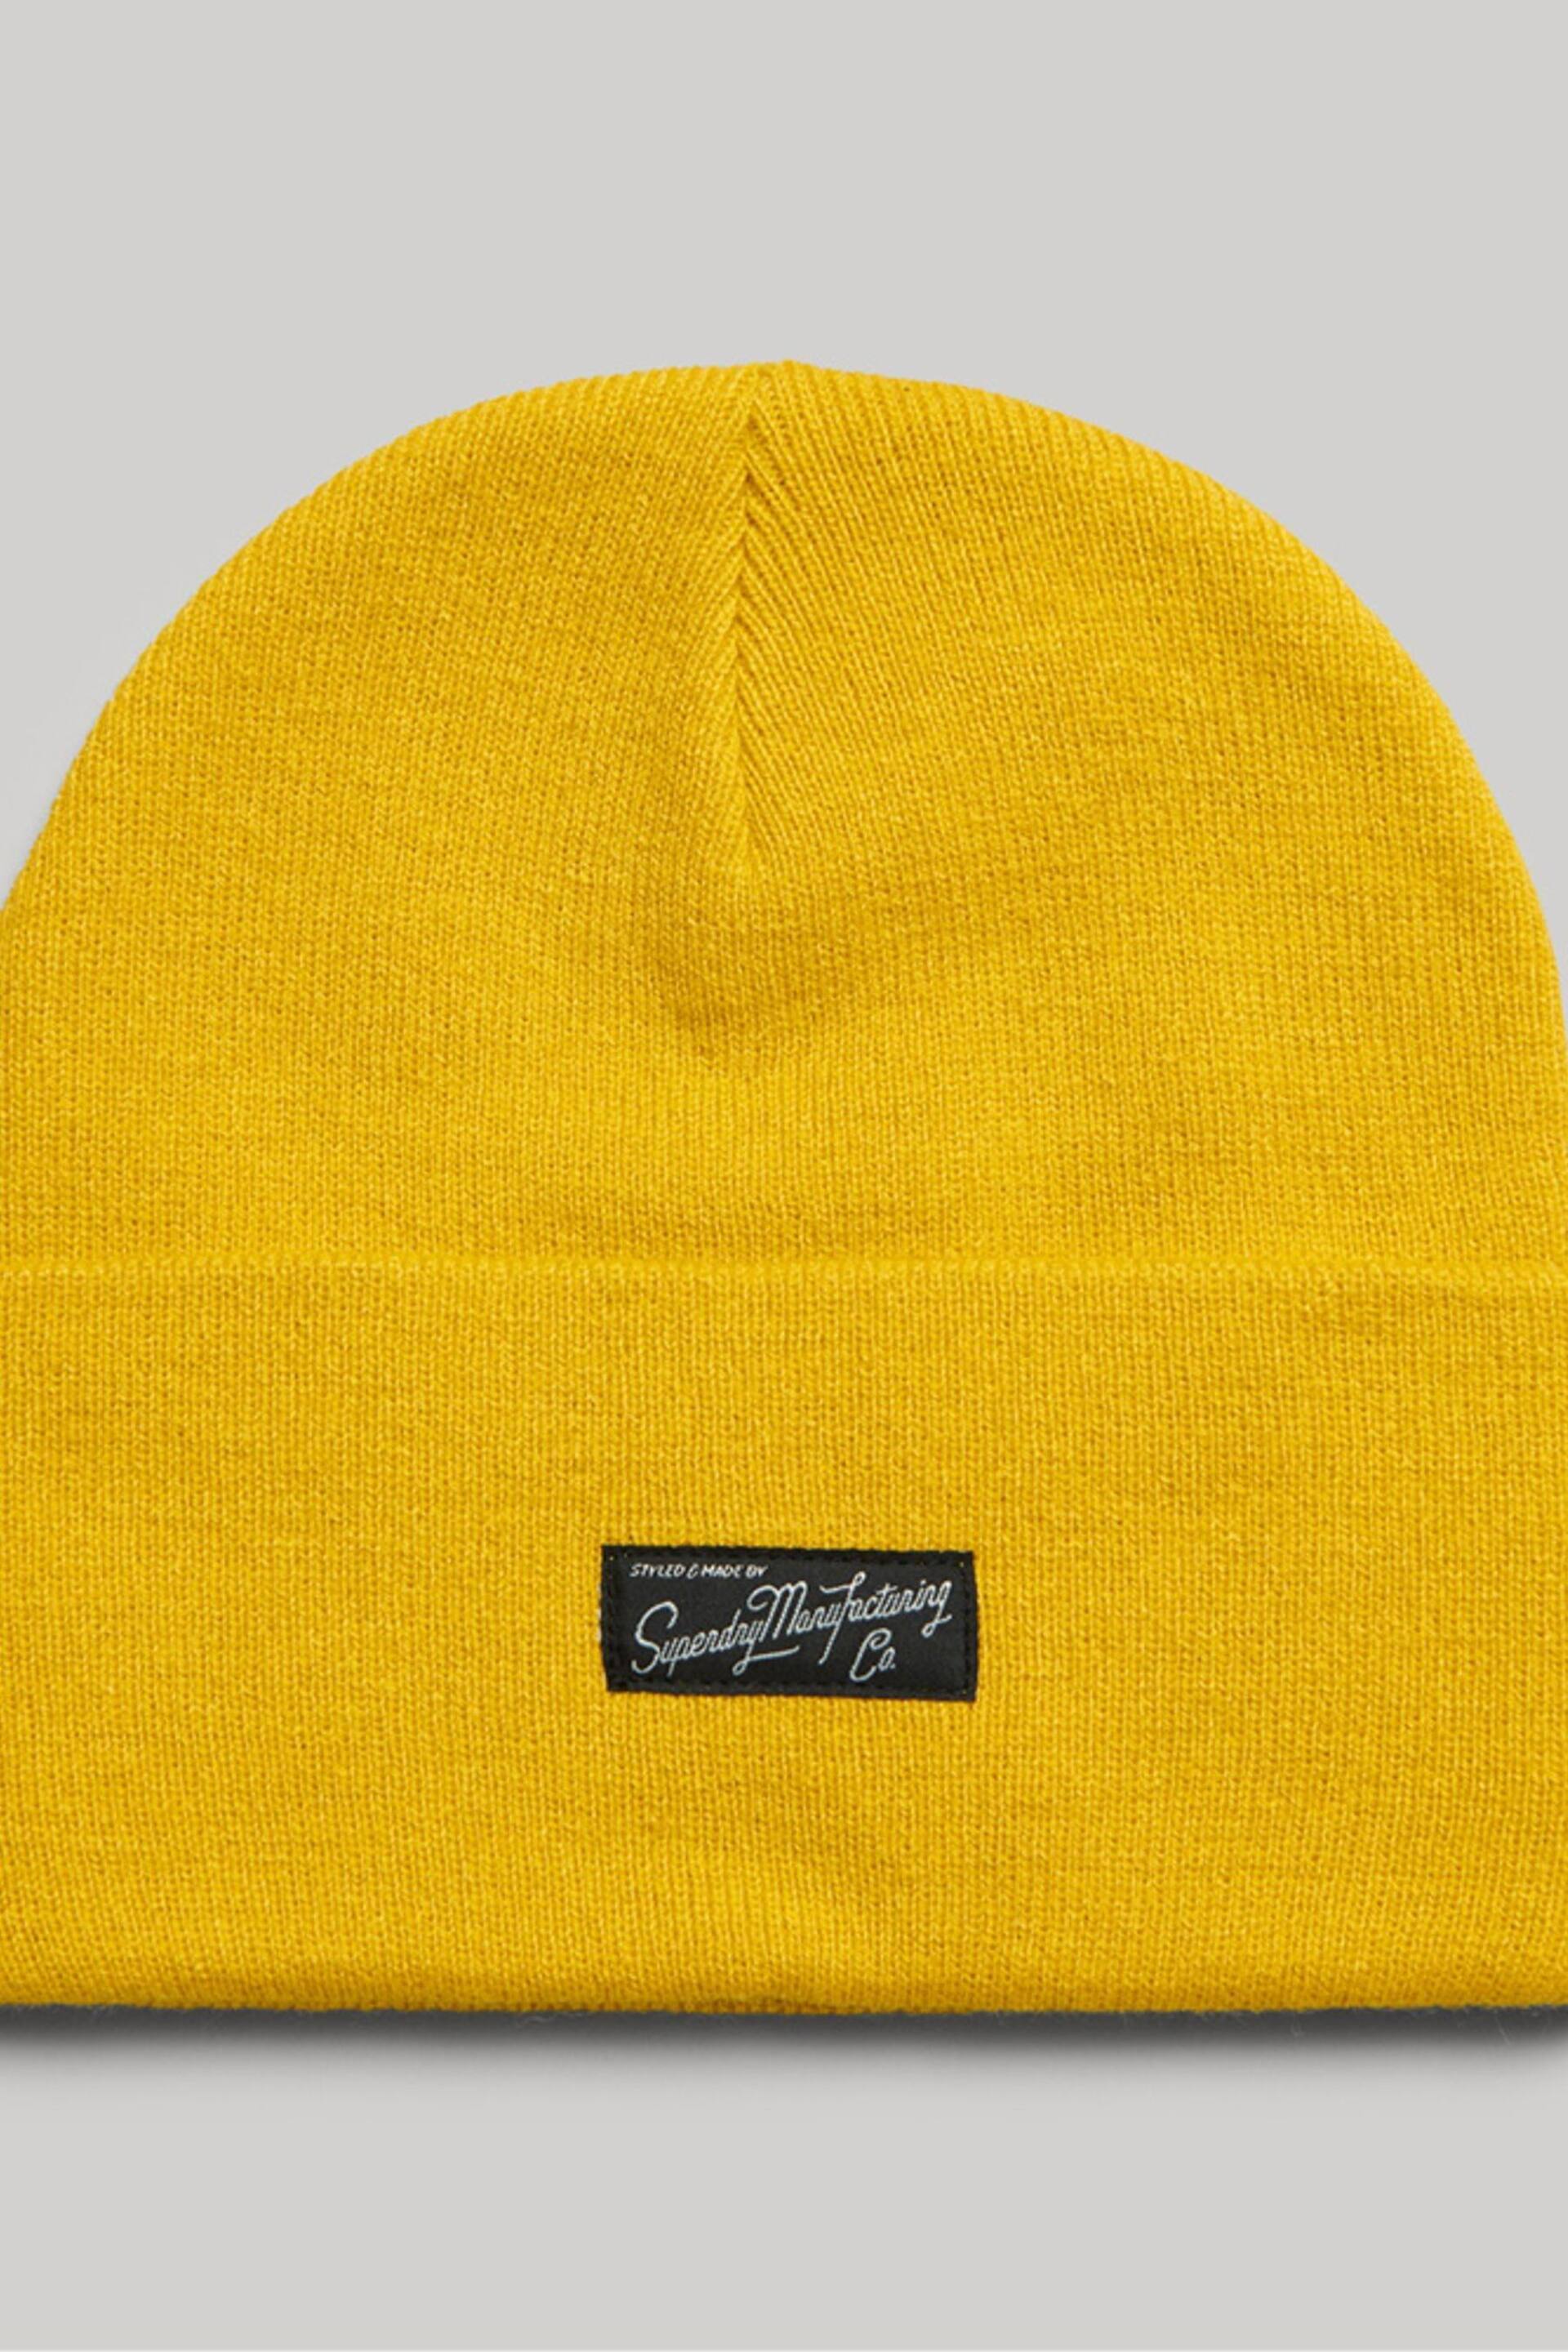 Superdry mustard yellow Essential Logo Bobble hat - Image 1 of 3